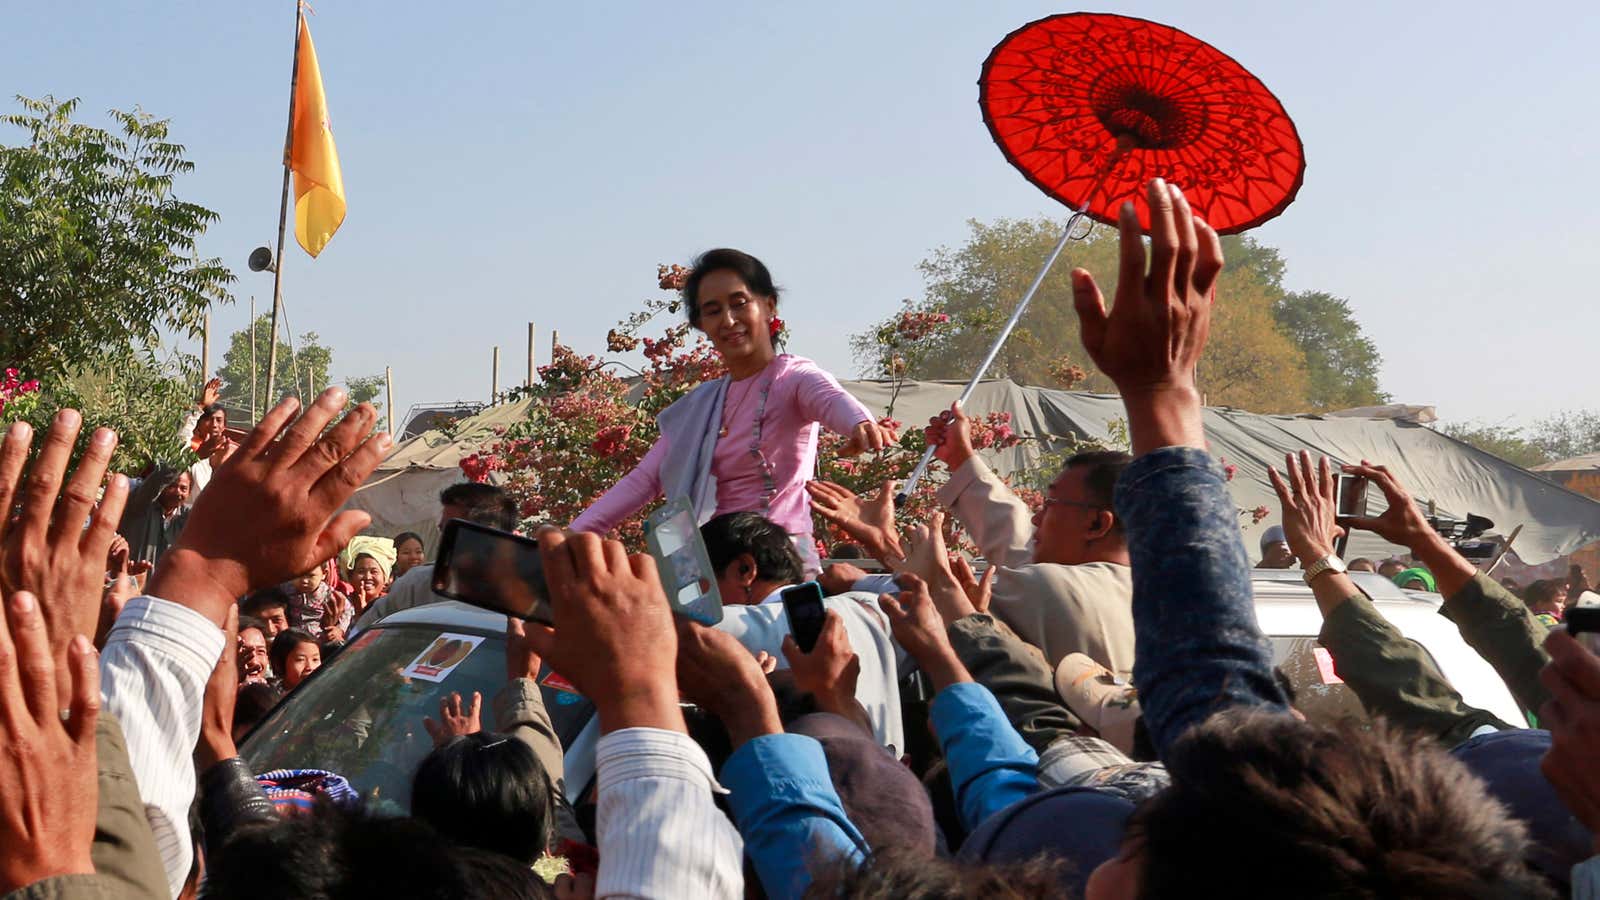 Aung San Suu Kyi greets supporters here, but is silent on issues that greatly demand her attention.